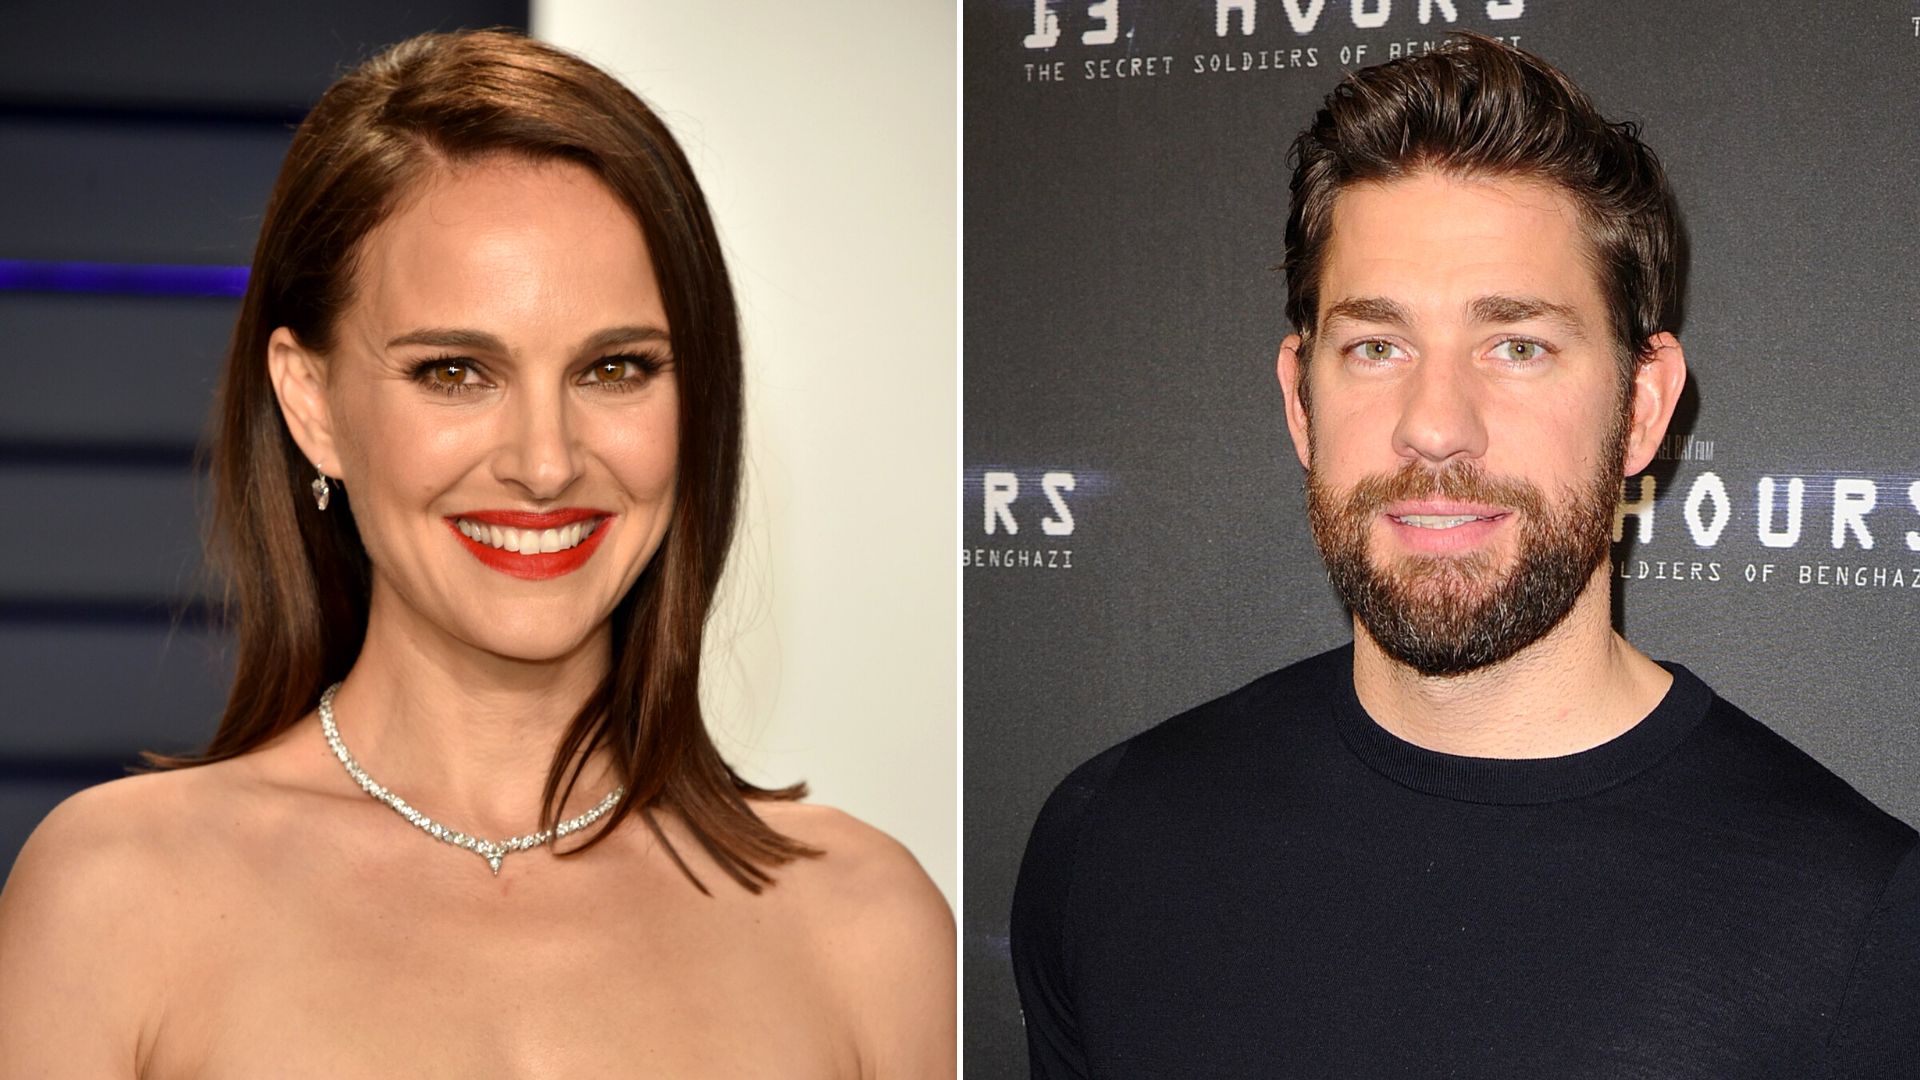 This Next Project With Natalie Portman and John Krasinski Promises to be “Amazing”